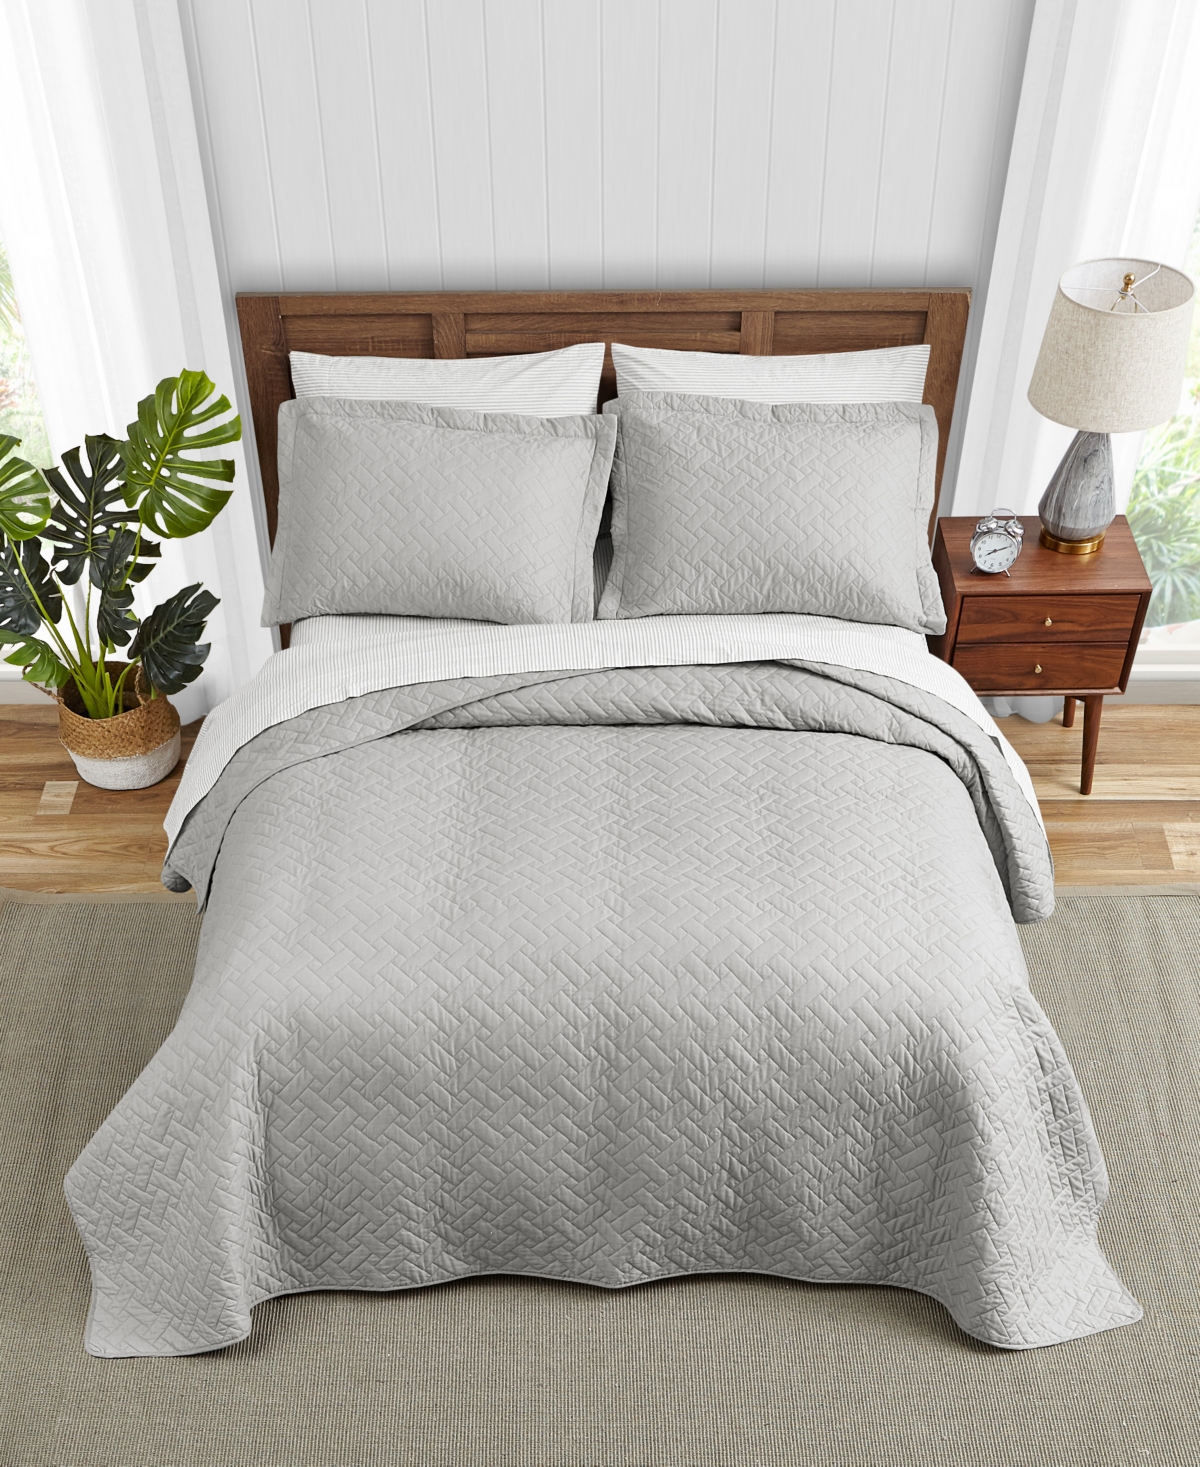 TOMMY BAHAMA HOME TOMMY BAHAMA SOLID PELICAN GREY REVERSIBLE 3-PIECE KING QUILT SET BEDDING